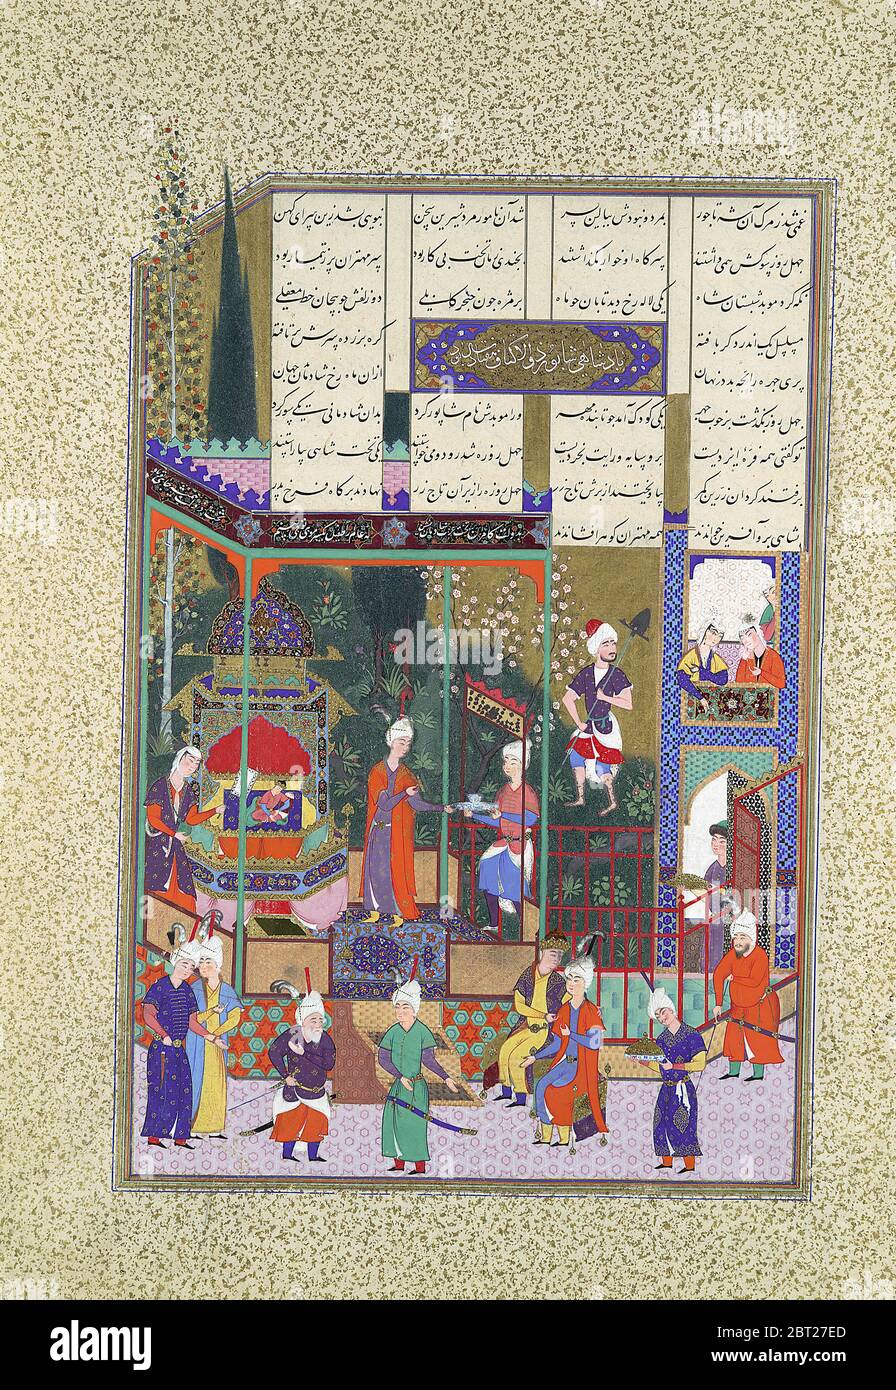 The Coronation of the Infant Shapur II, Folio 538r from the Shahnama (Book of Kings) of Shah Tahmasp, ca. 1525-30. Stock Photo